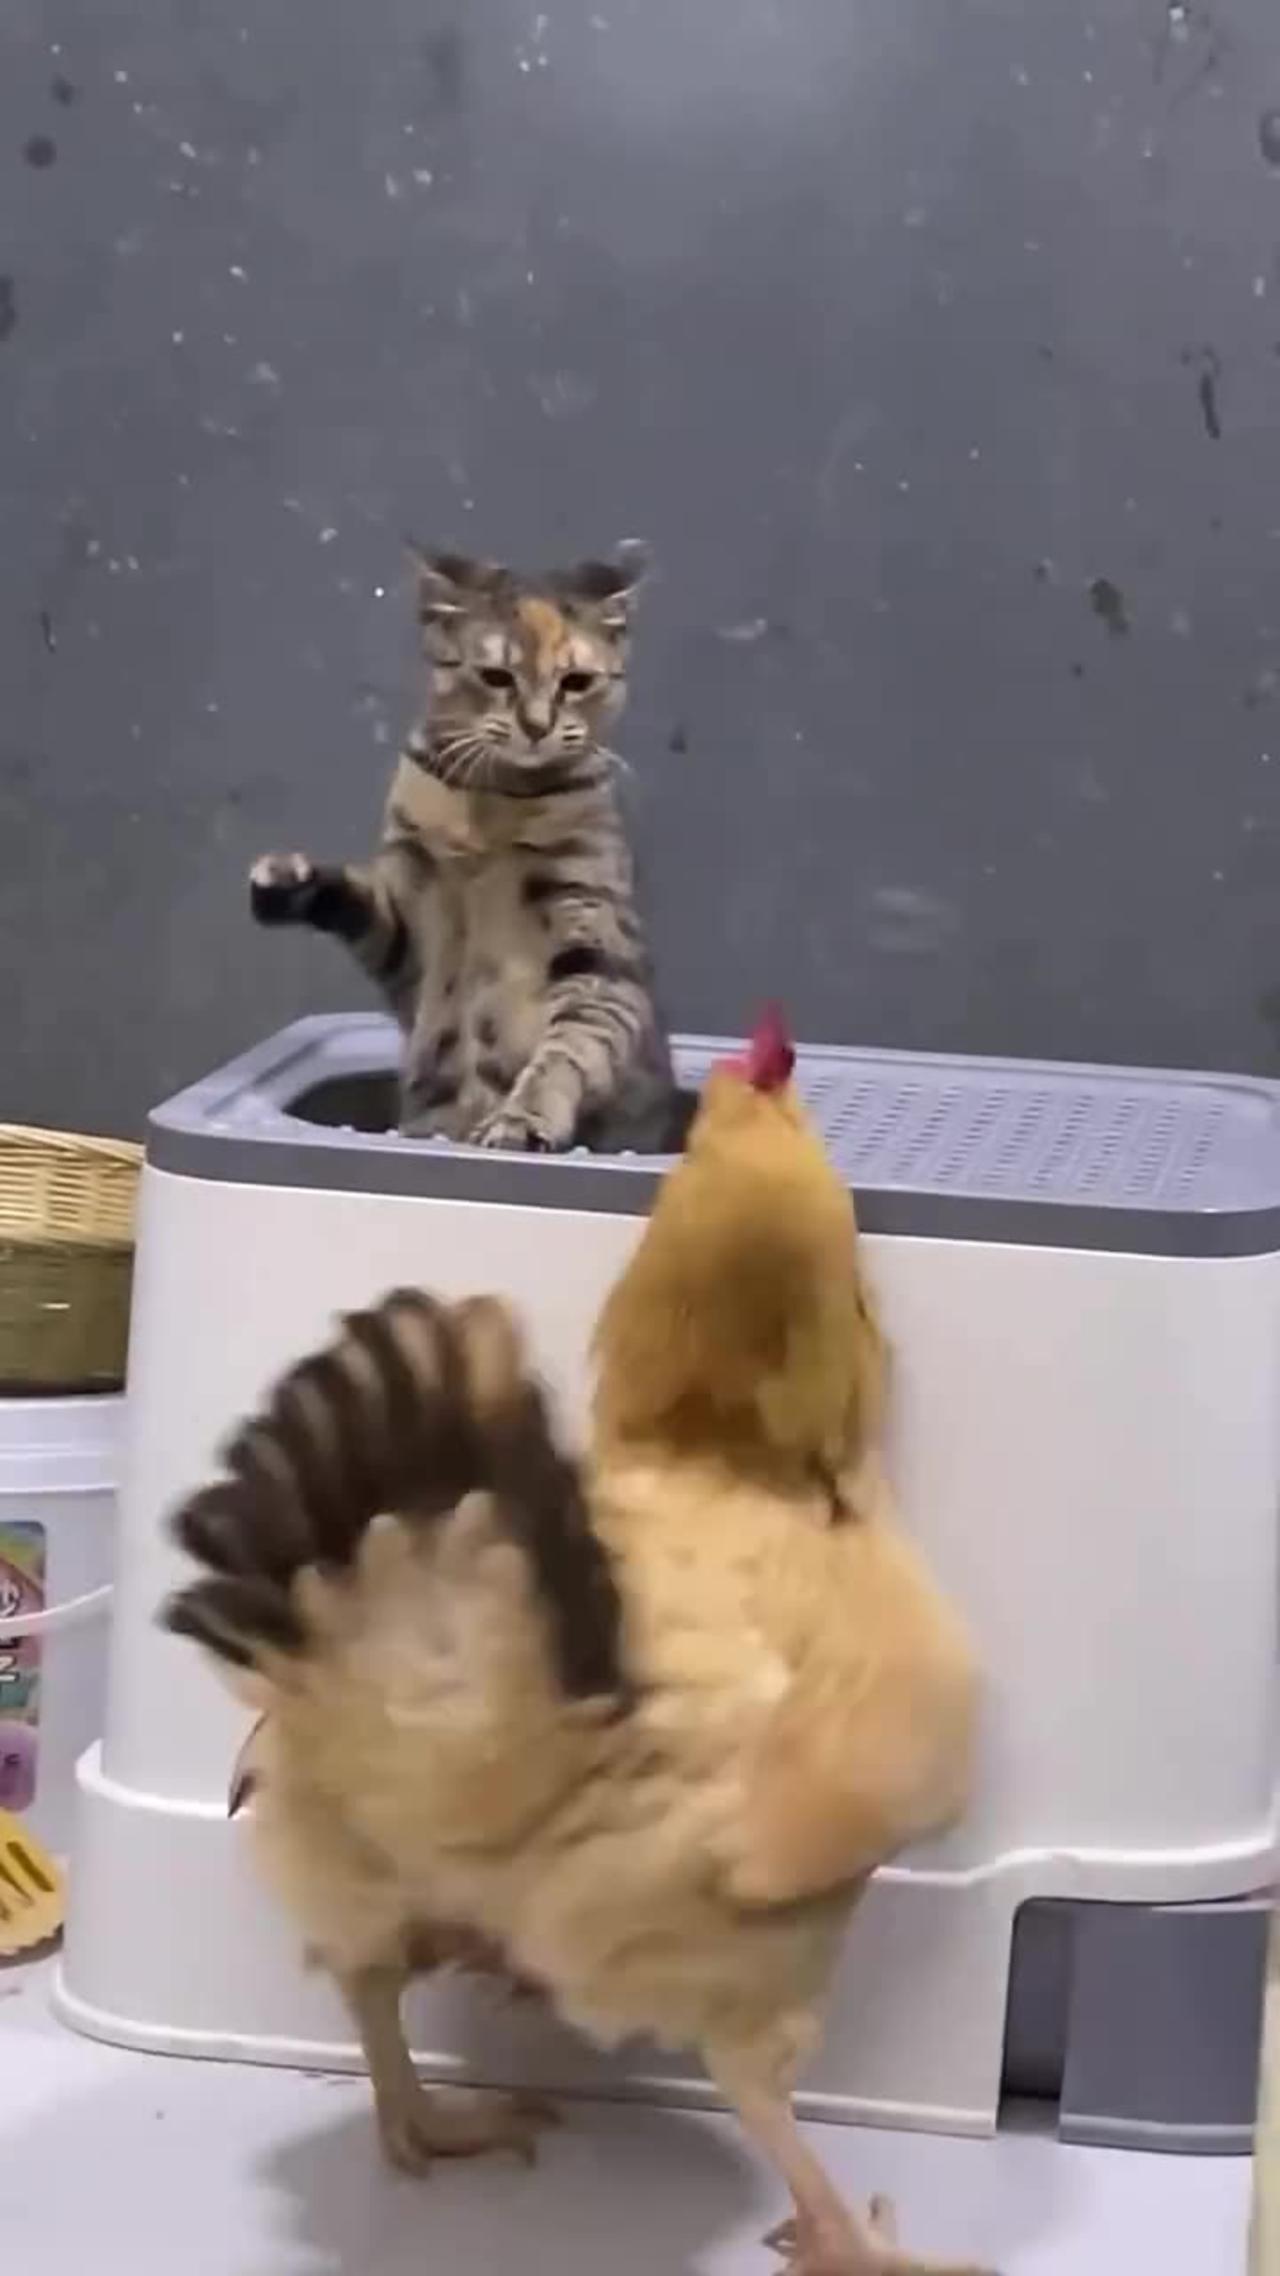 "Fierce Feathers Fly: The Epic Battle Between Cat and Hen"